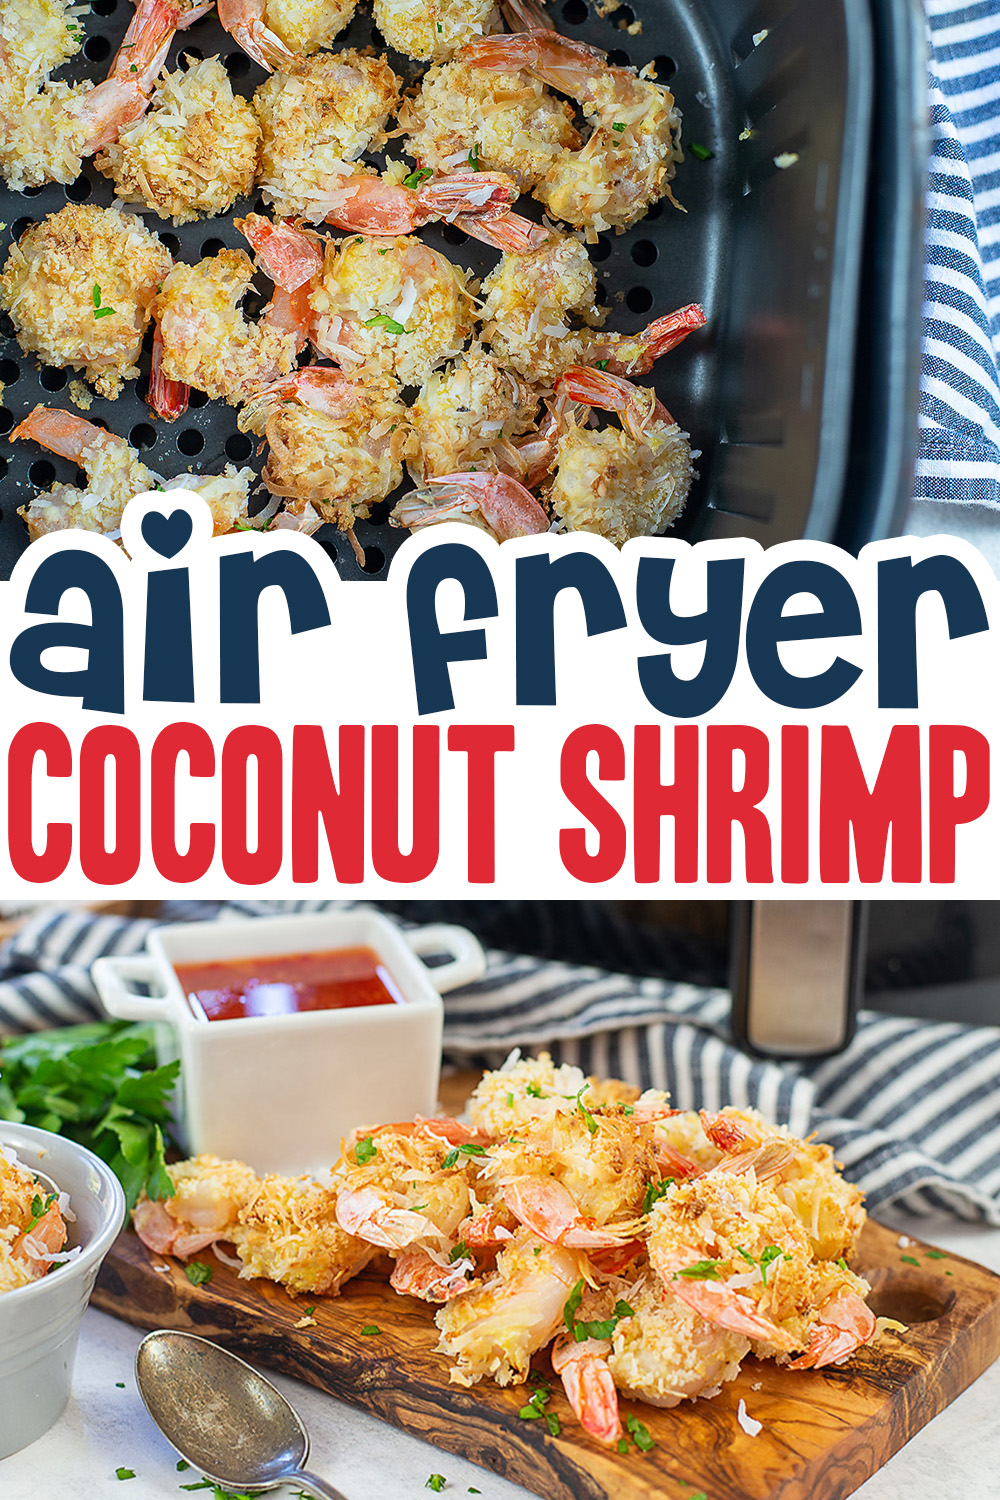 This coconut shrimp was cooked in the air in just 10 minutes!  The breading comes out nice and crisp too!